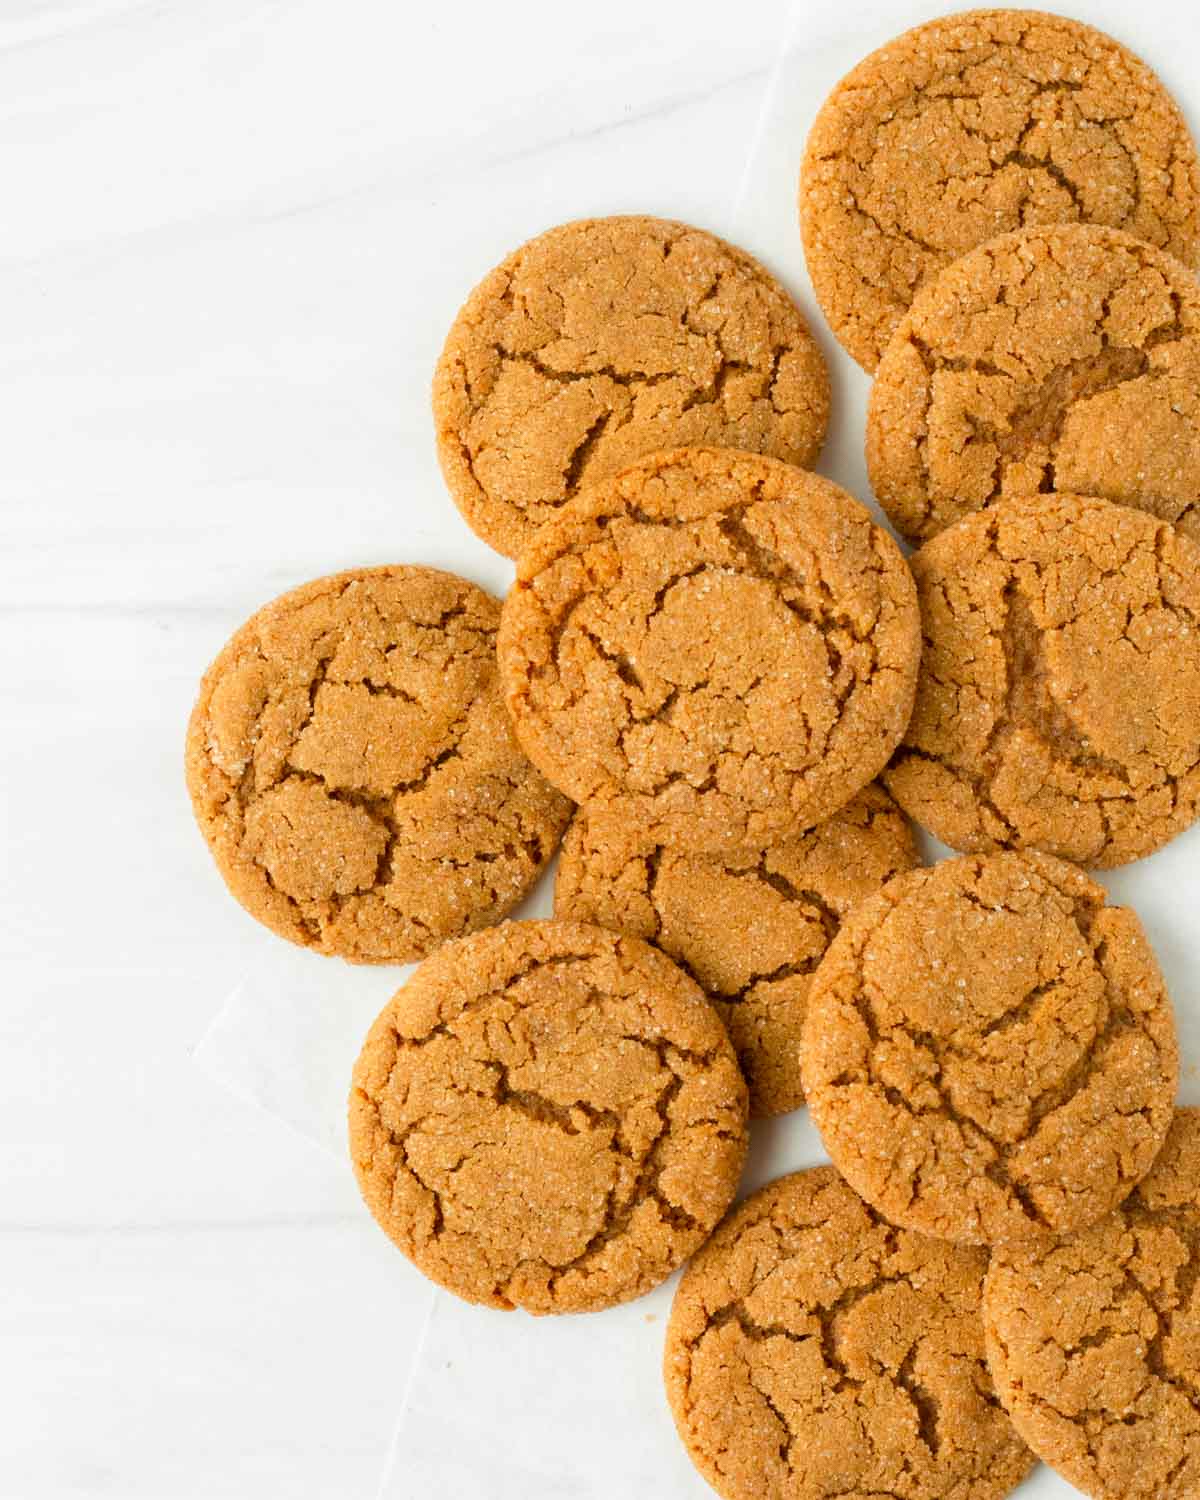 These molasses cookies are a classic Christmas cookie made with a flavorful dough filled with molasses, brown sugar, and warm spices. Make these classic Christmas cookies on your Christmas cookie baking day to share for the holidays.